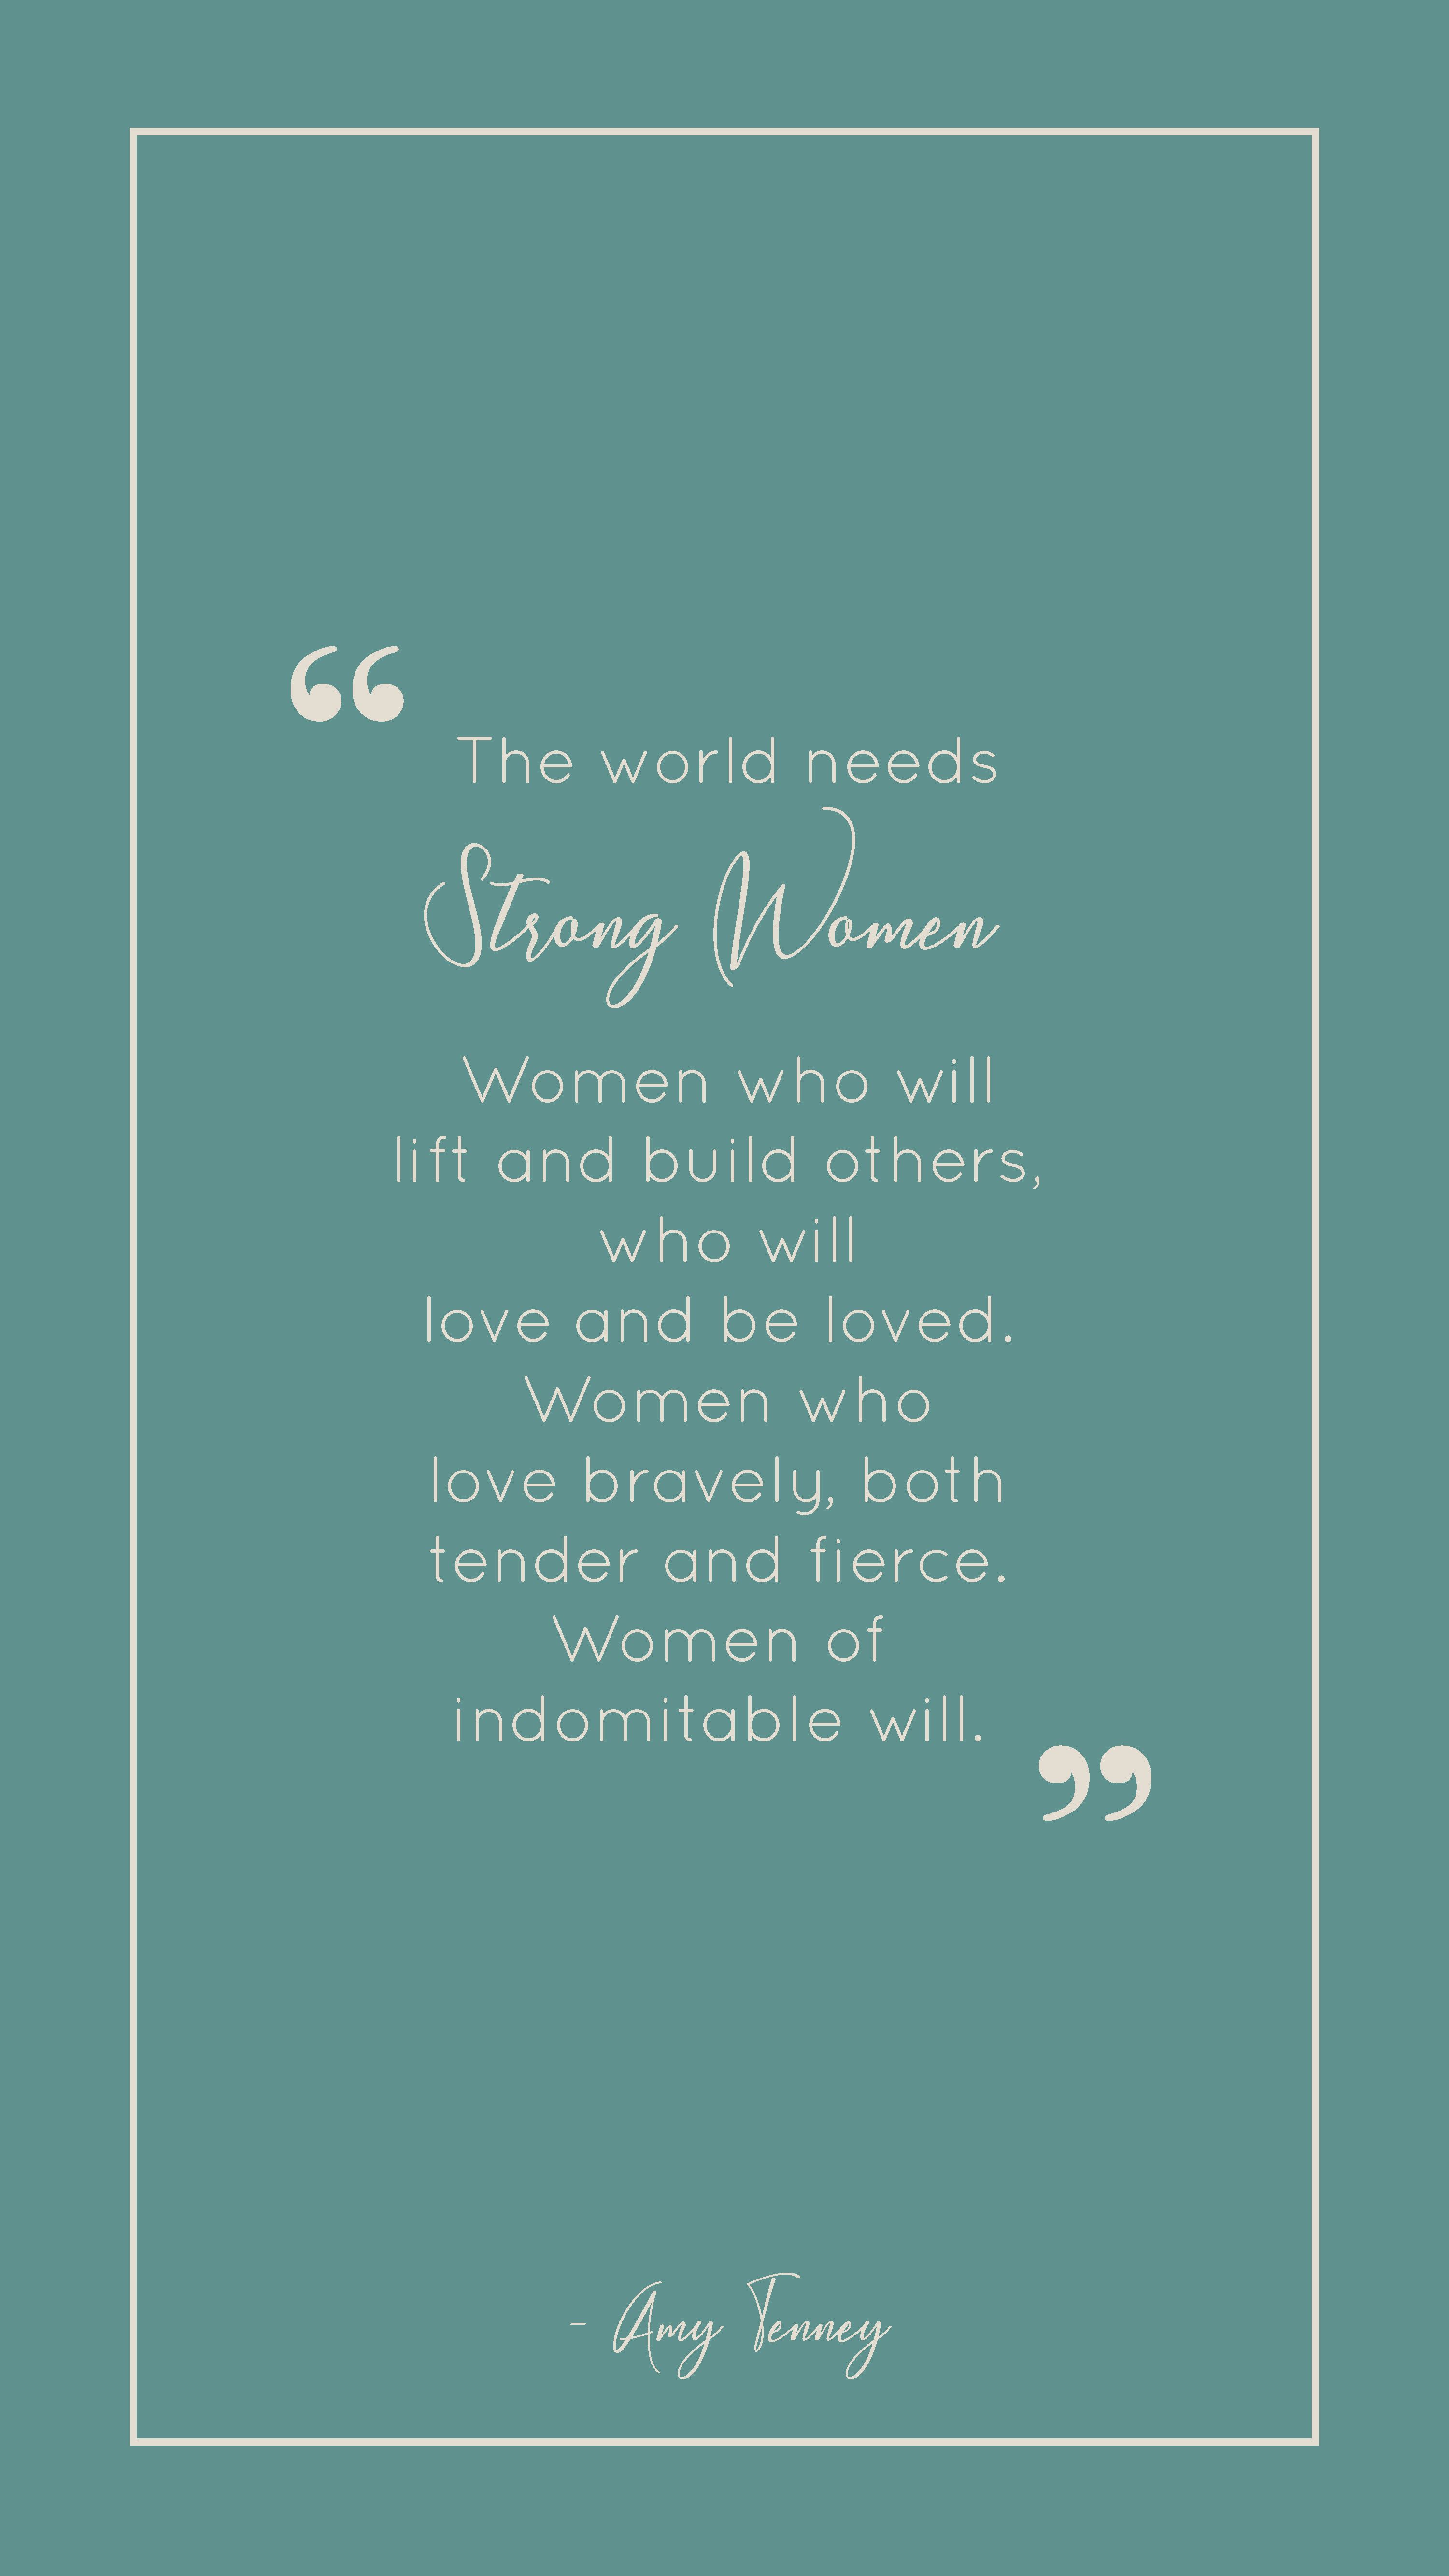 Quote Wallpaper Screensaver for Phone. Strong women quotes, Woman quotes, Strong women